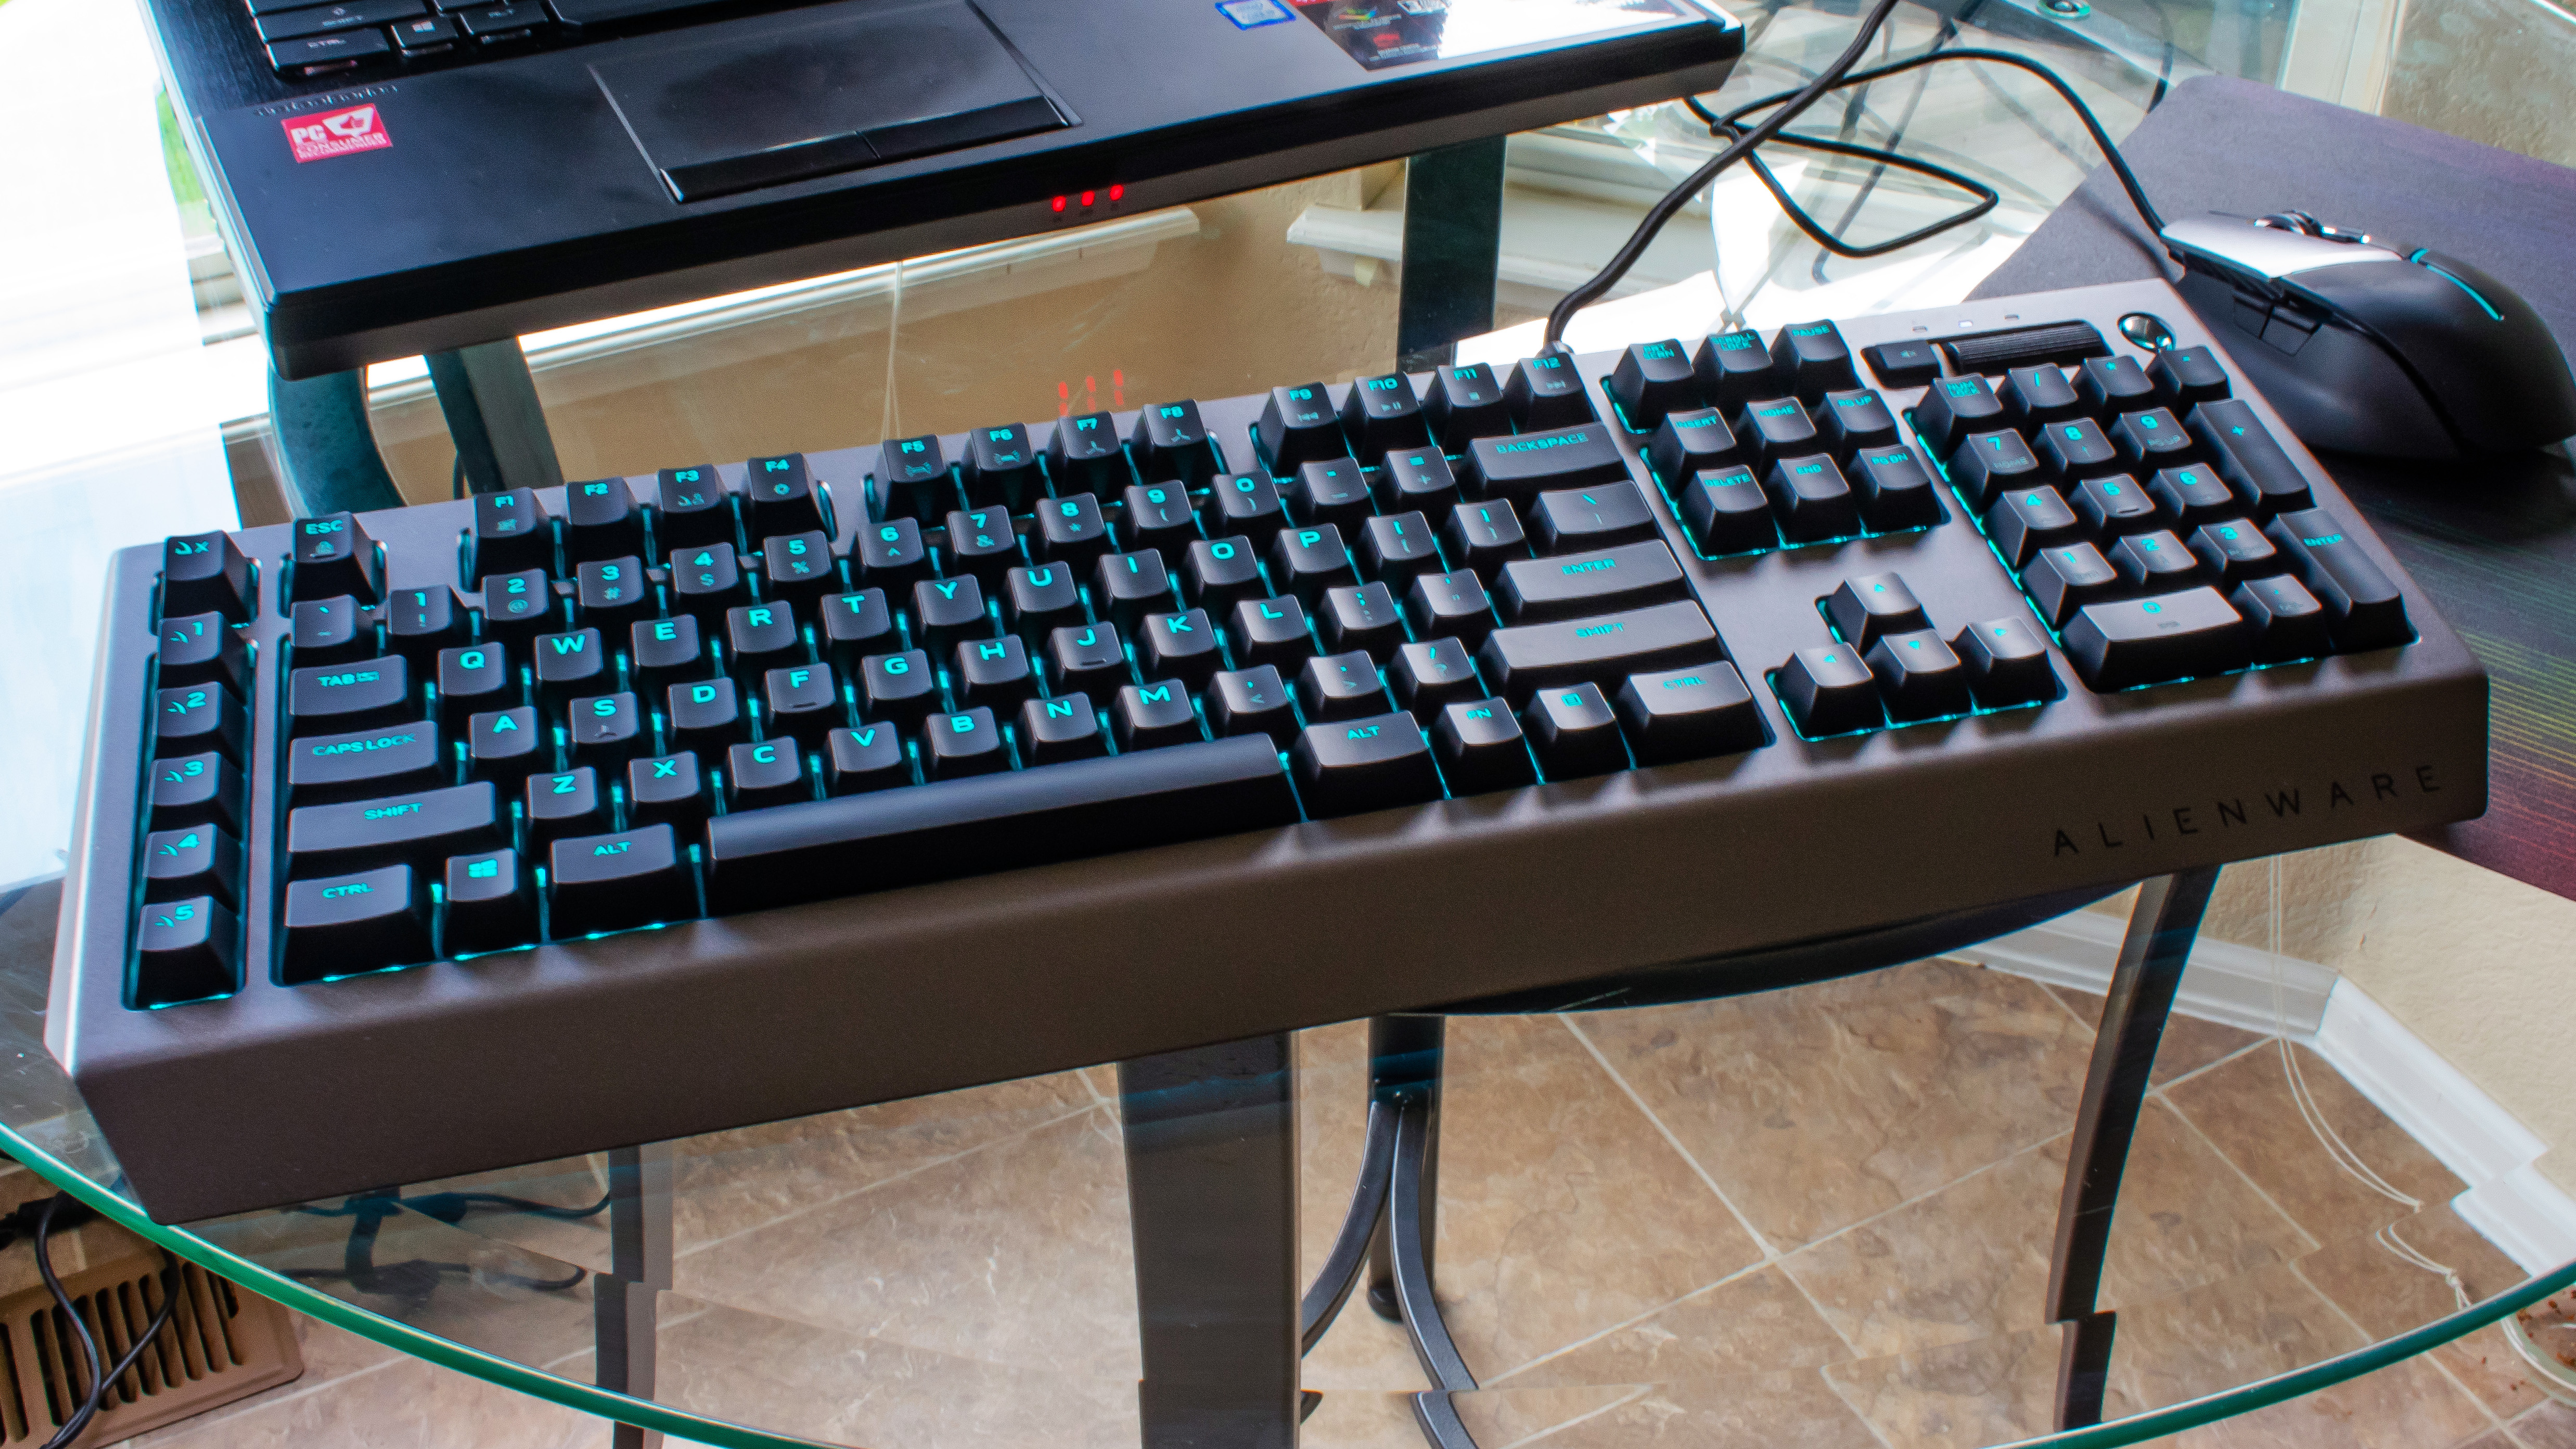 Alienware Pro Gaming Keyboard on a glass table next to a laptop and a mouse